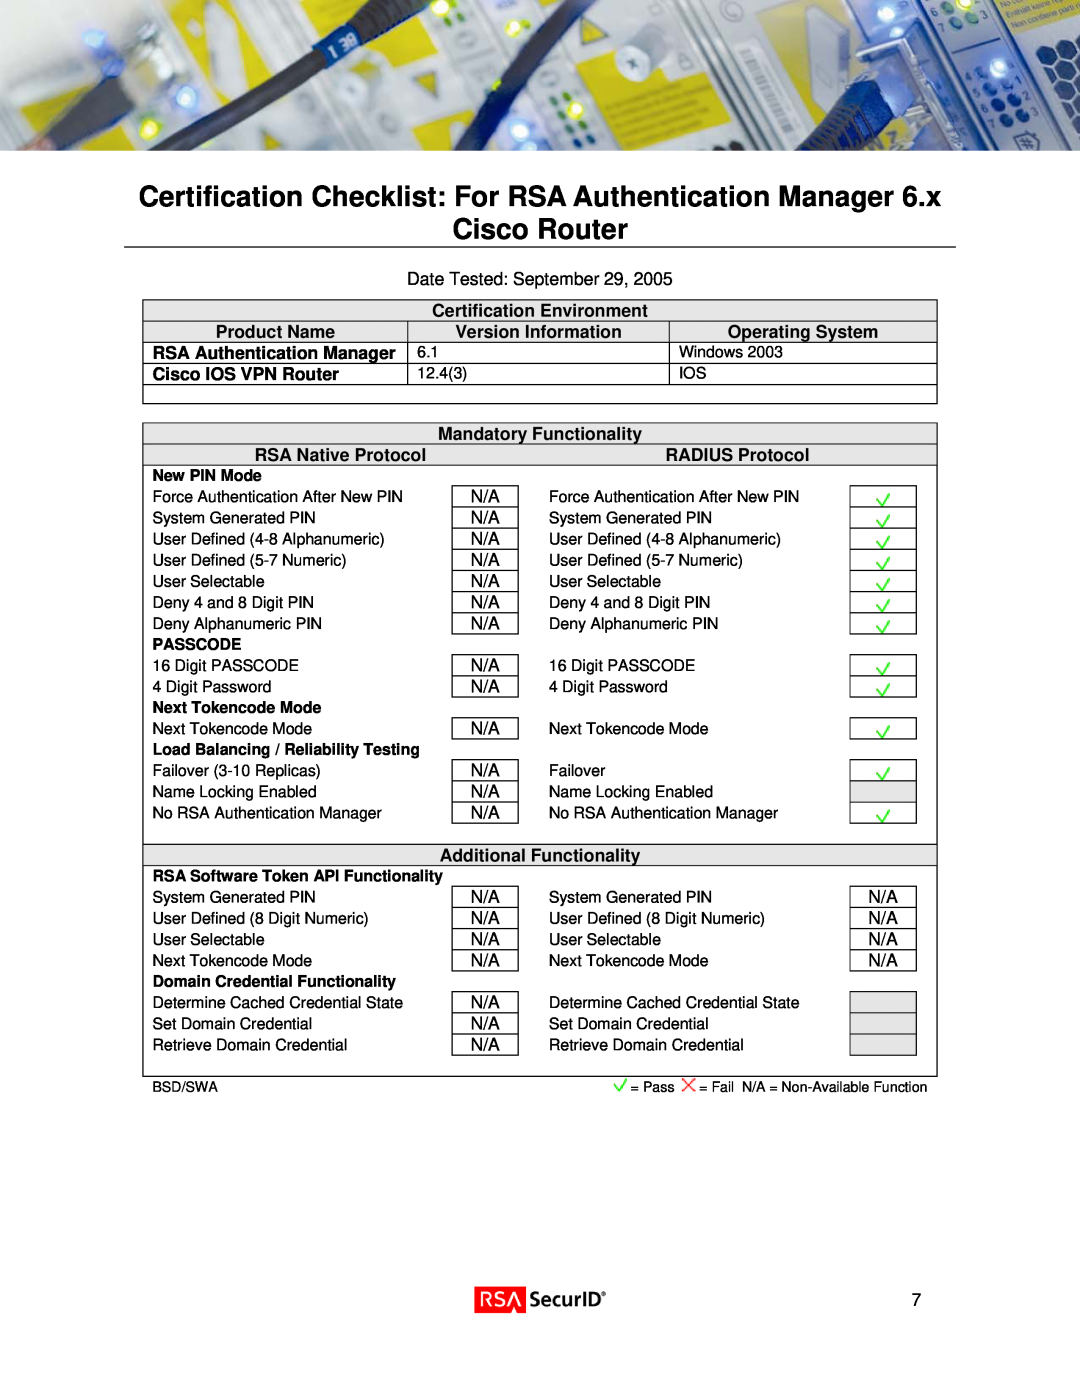 Cisco Systems IOS Router manual Certification Checklist For RSA Authentication Manager Cisco Router 